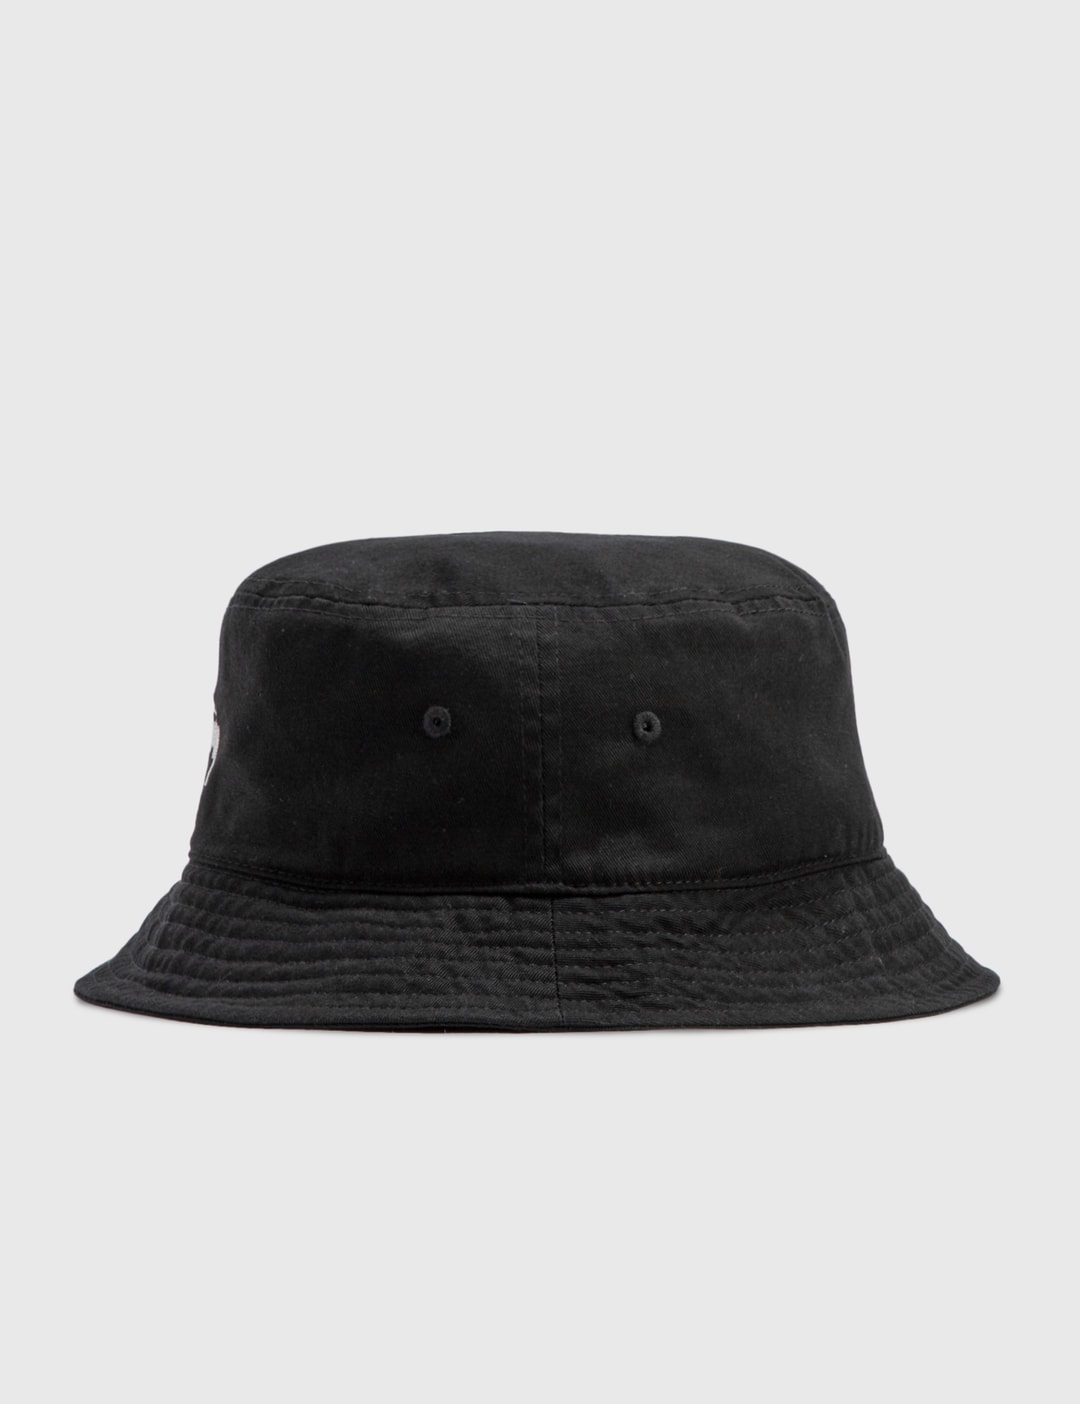 Stüssy - Stock Bucket Hat | HBX - Globally Curated Fashion and ...